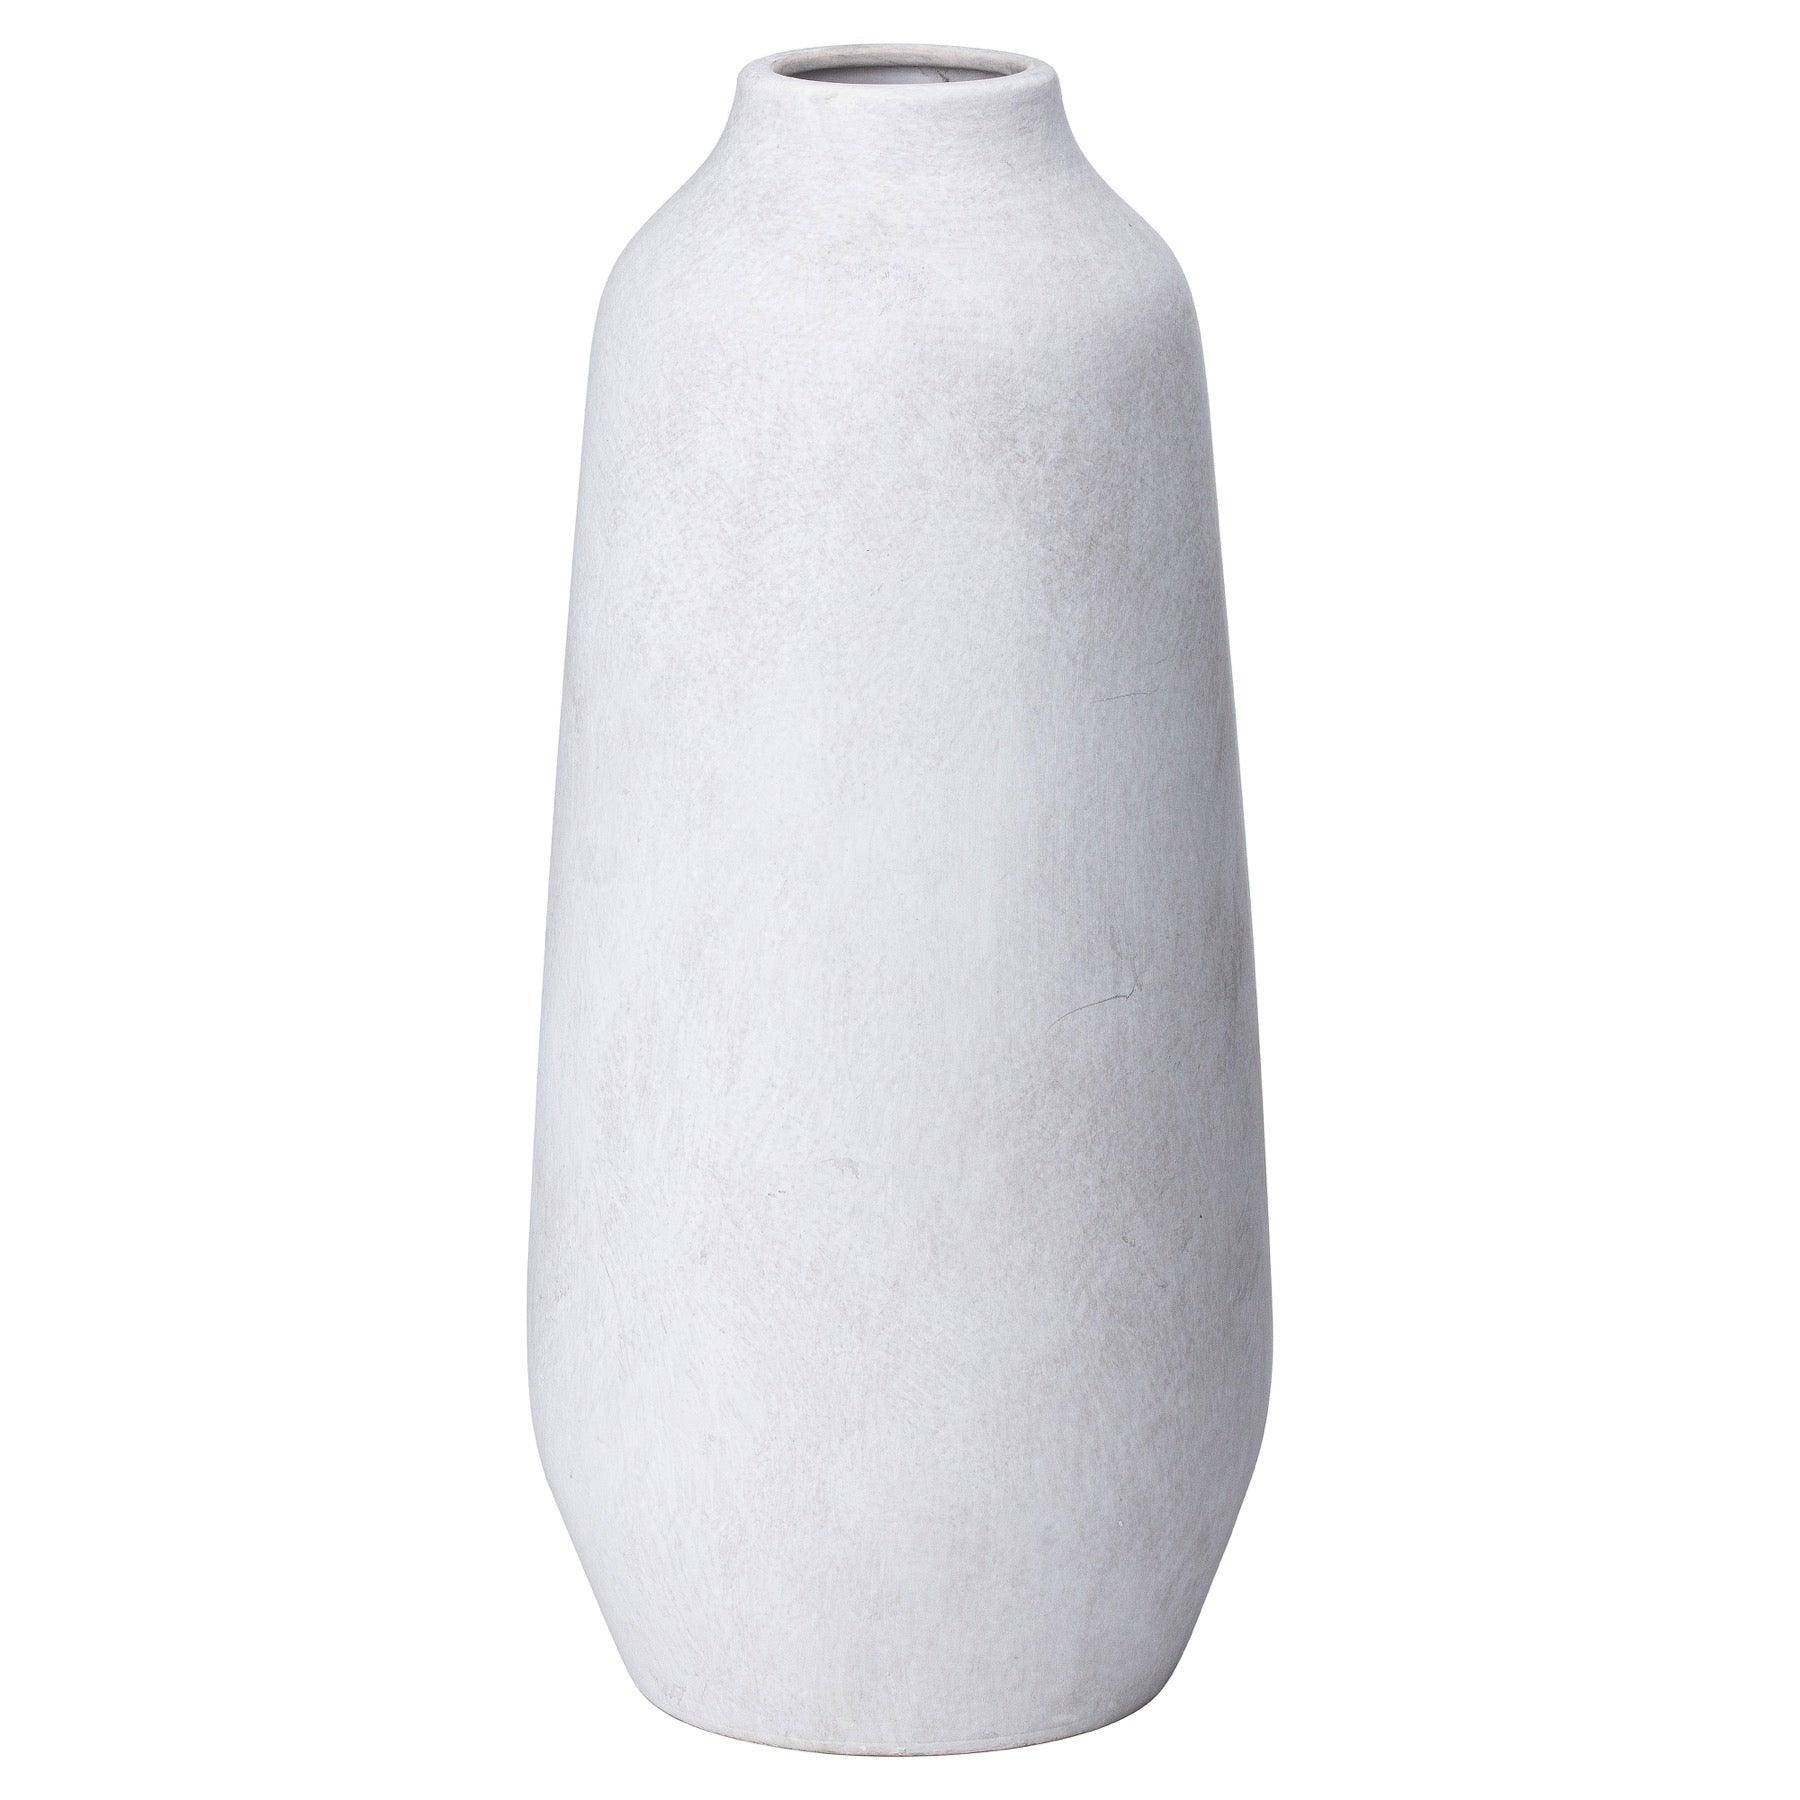 View Darcy Ople Tall Vase information